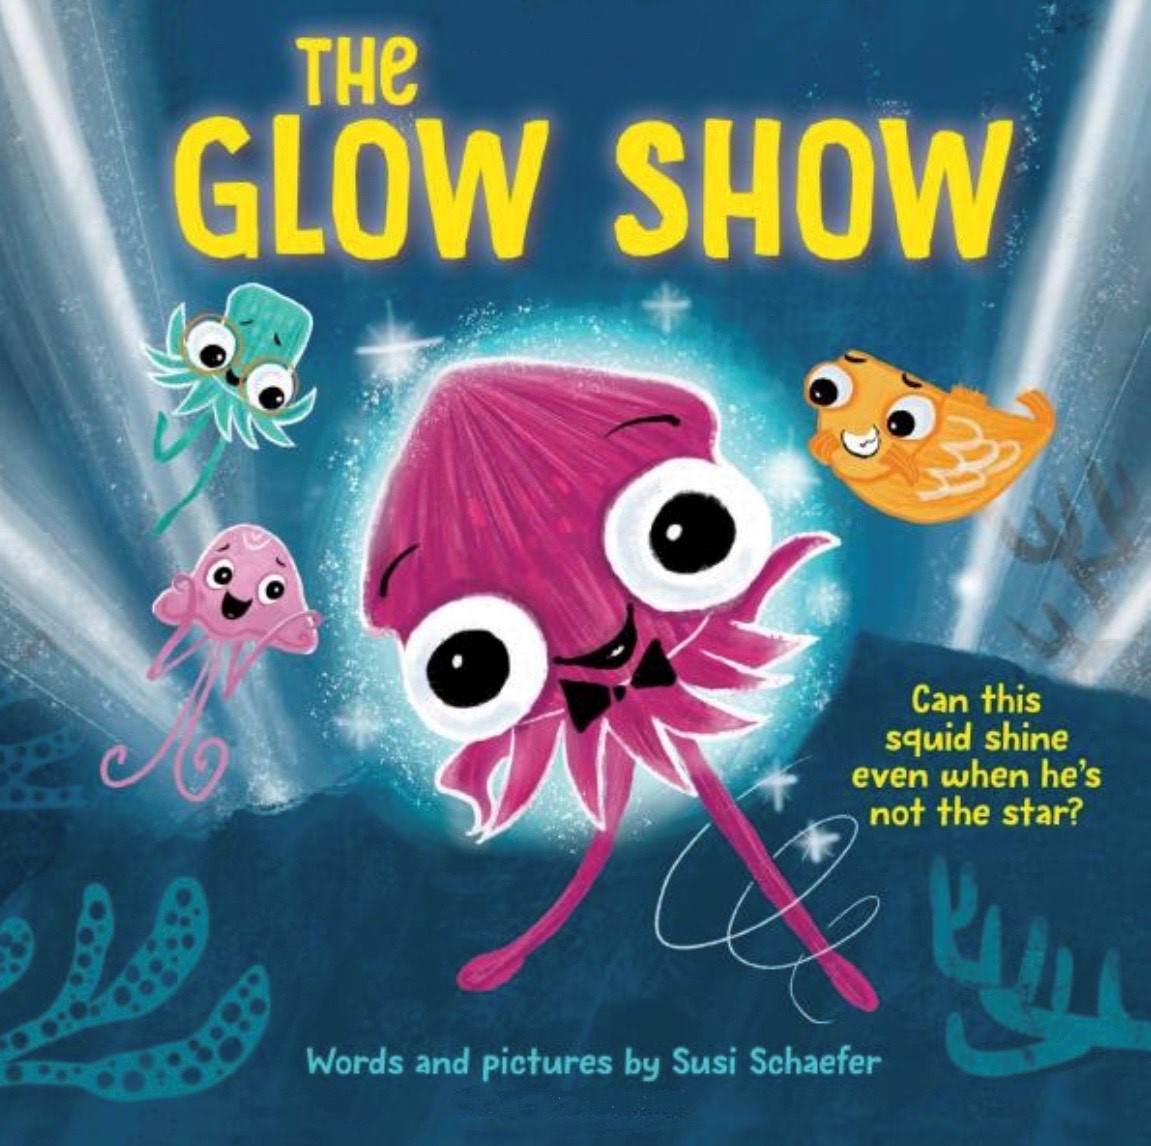 Bowers’ Books for Kids: Storytime in the Galleries with Author Susi Schaefer